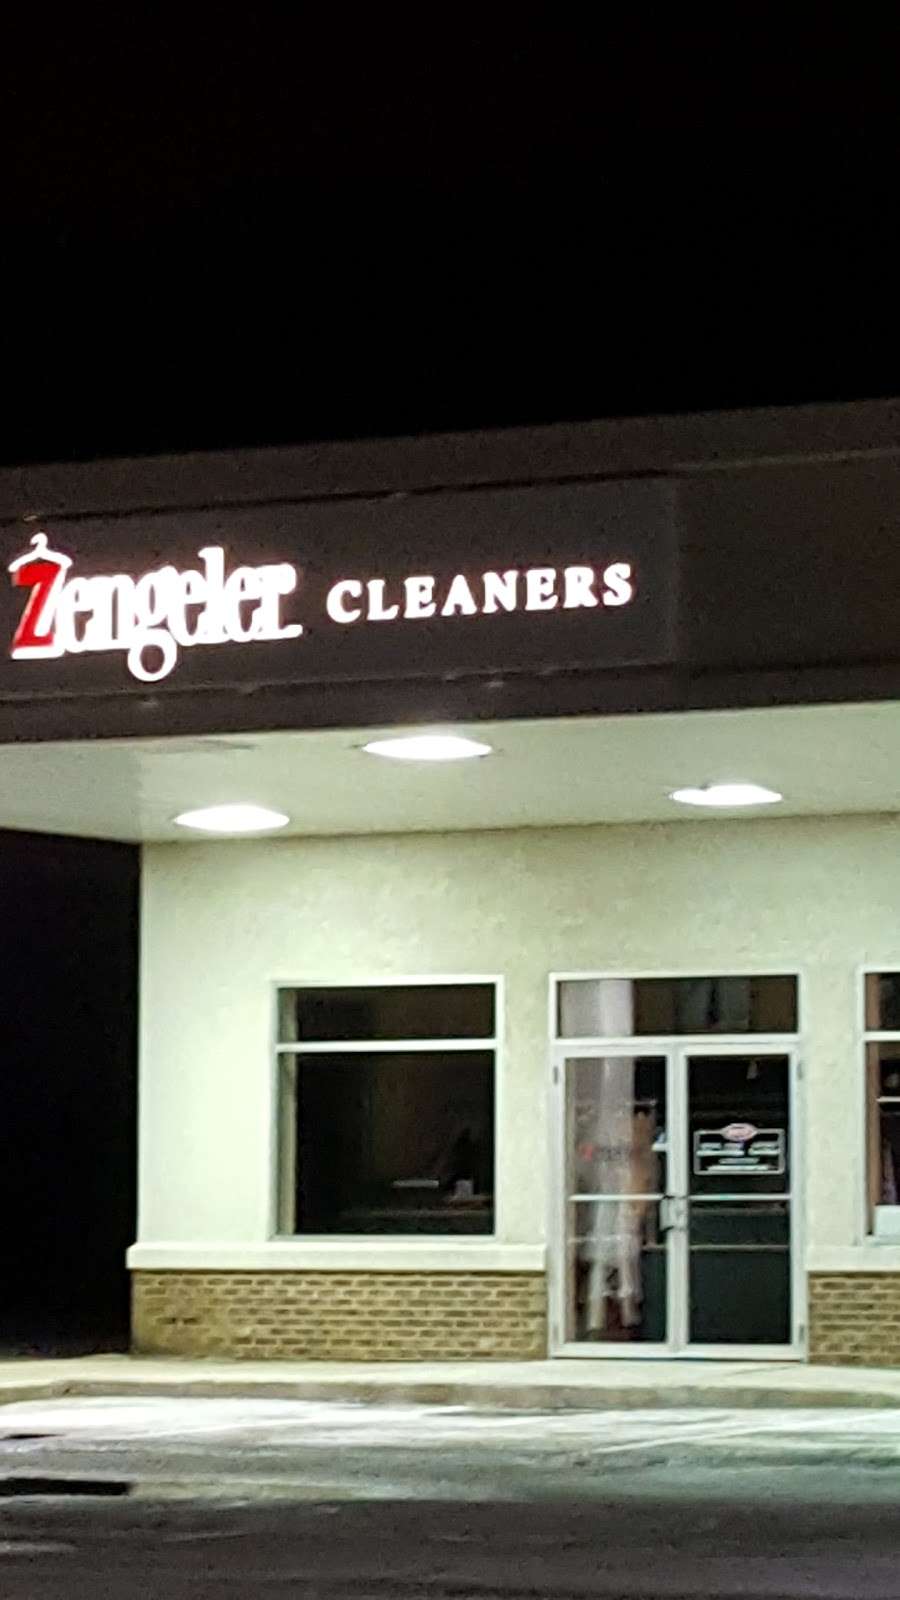 Zengeler Cleaners | 1401 Peterson Rd, Libertyville, IL 60048 | Phone: (847) 816-1700